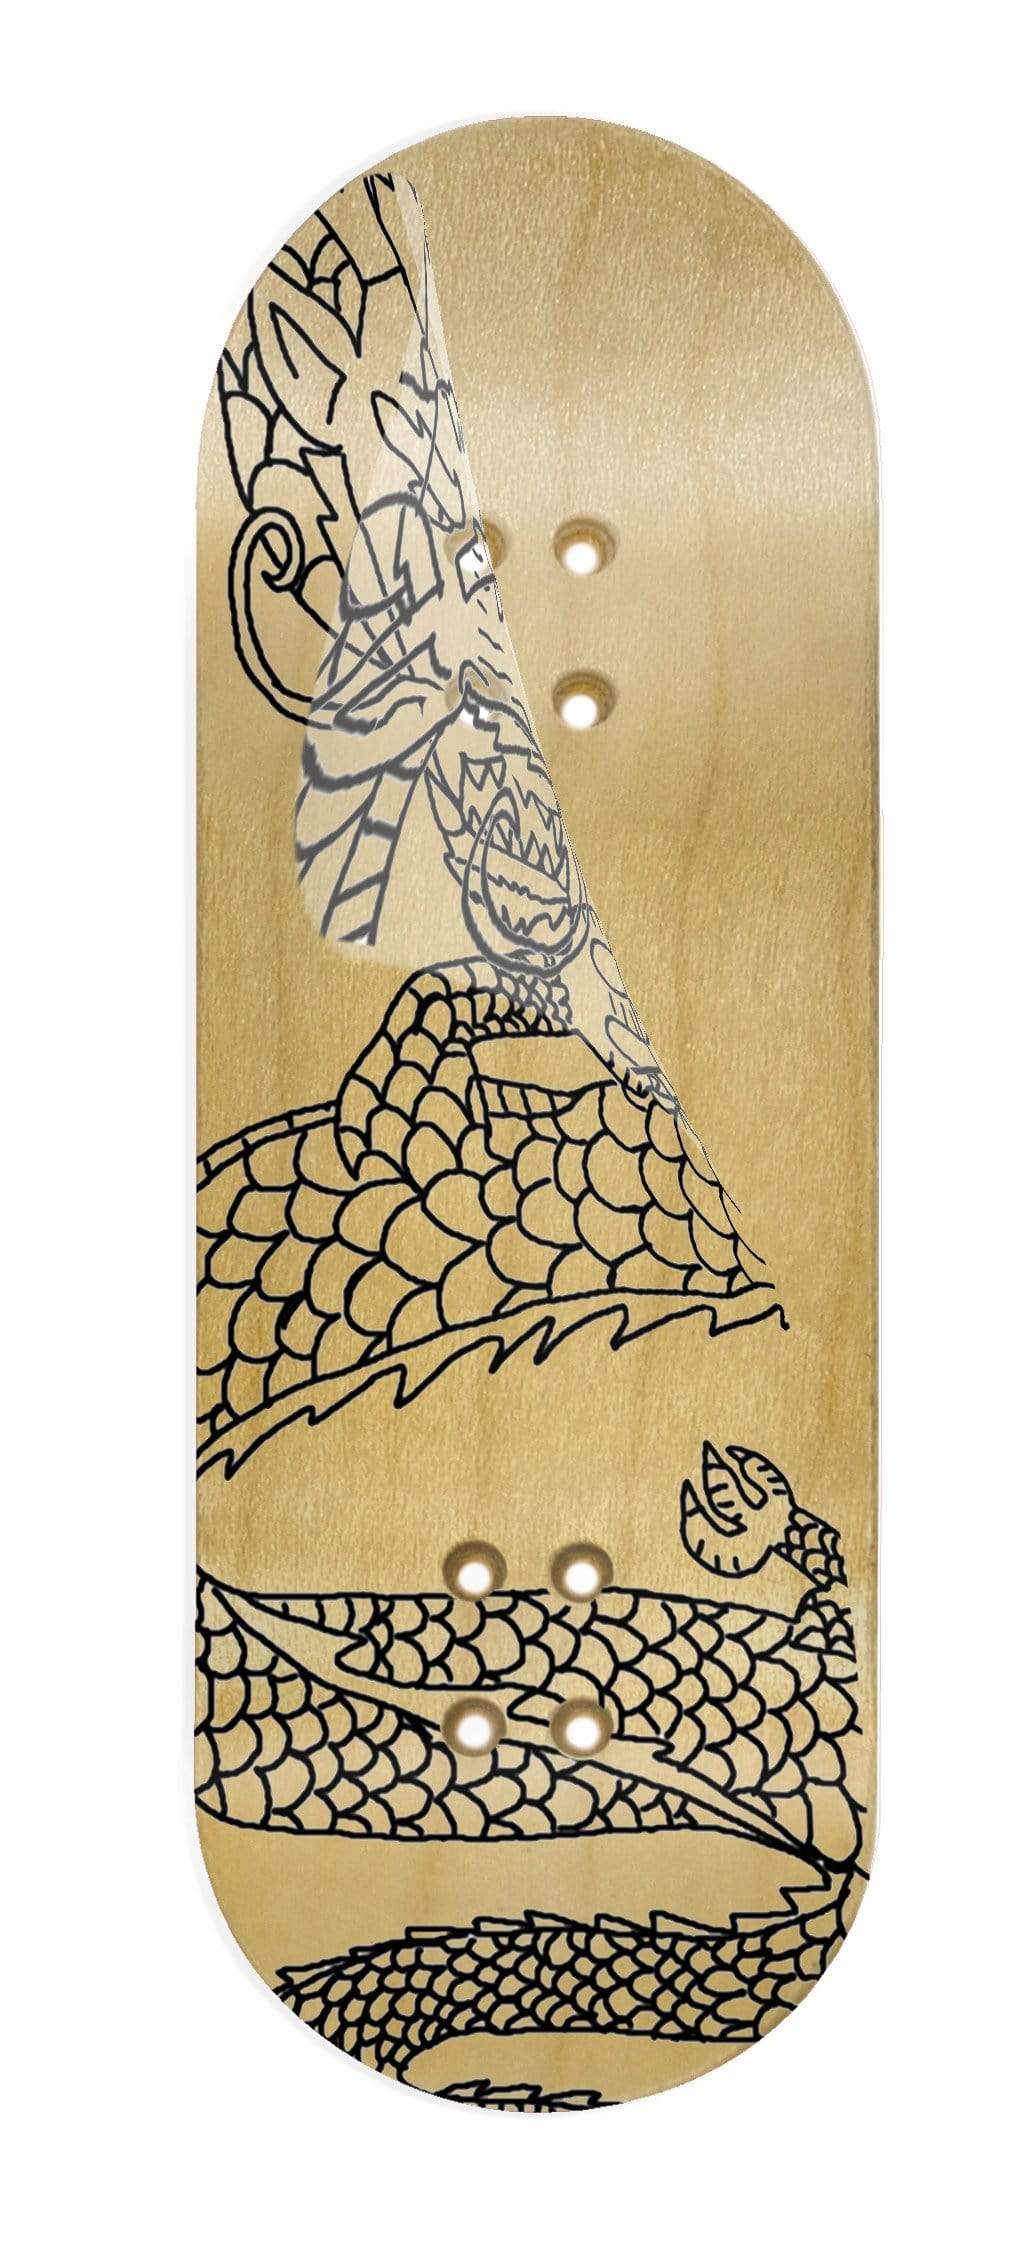 Teak Tuning "Black Dragon Born" WellVentions Collaboration Deck Graphic Wrap - Designed by Christian - 35mm x 110mm (Transparent Background)